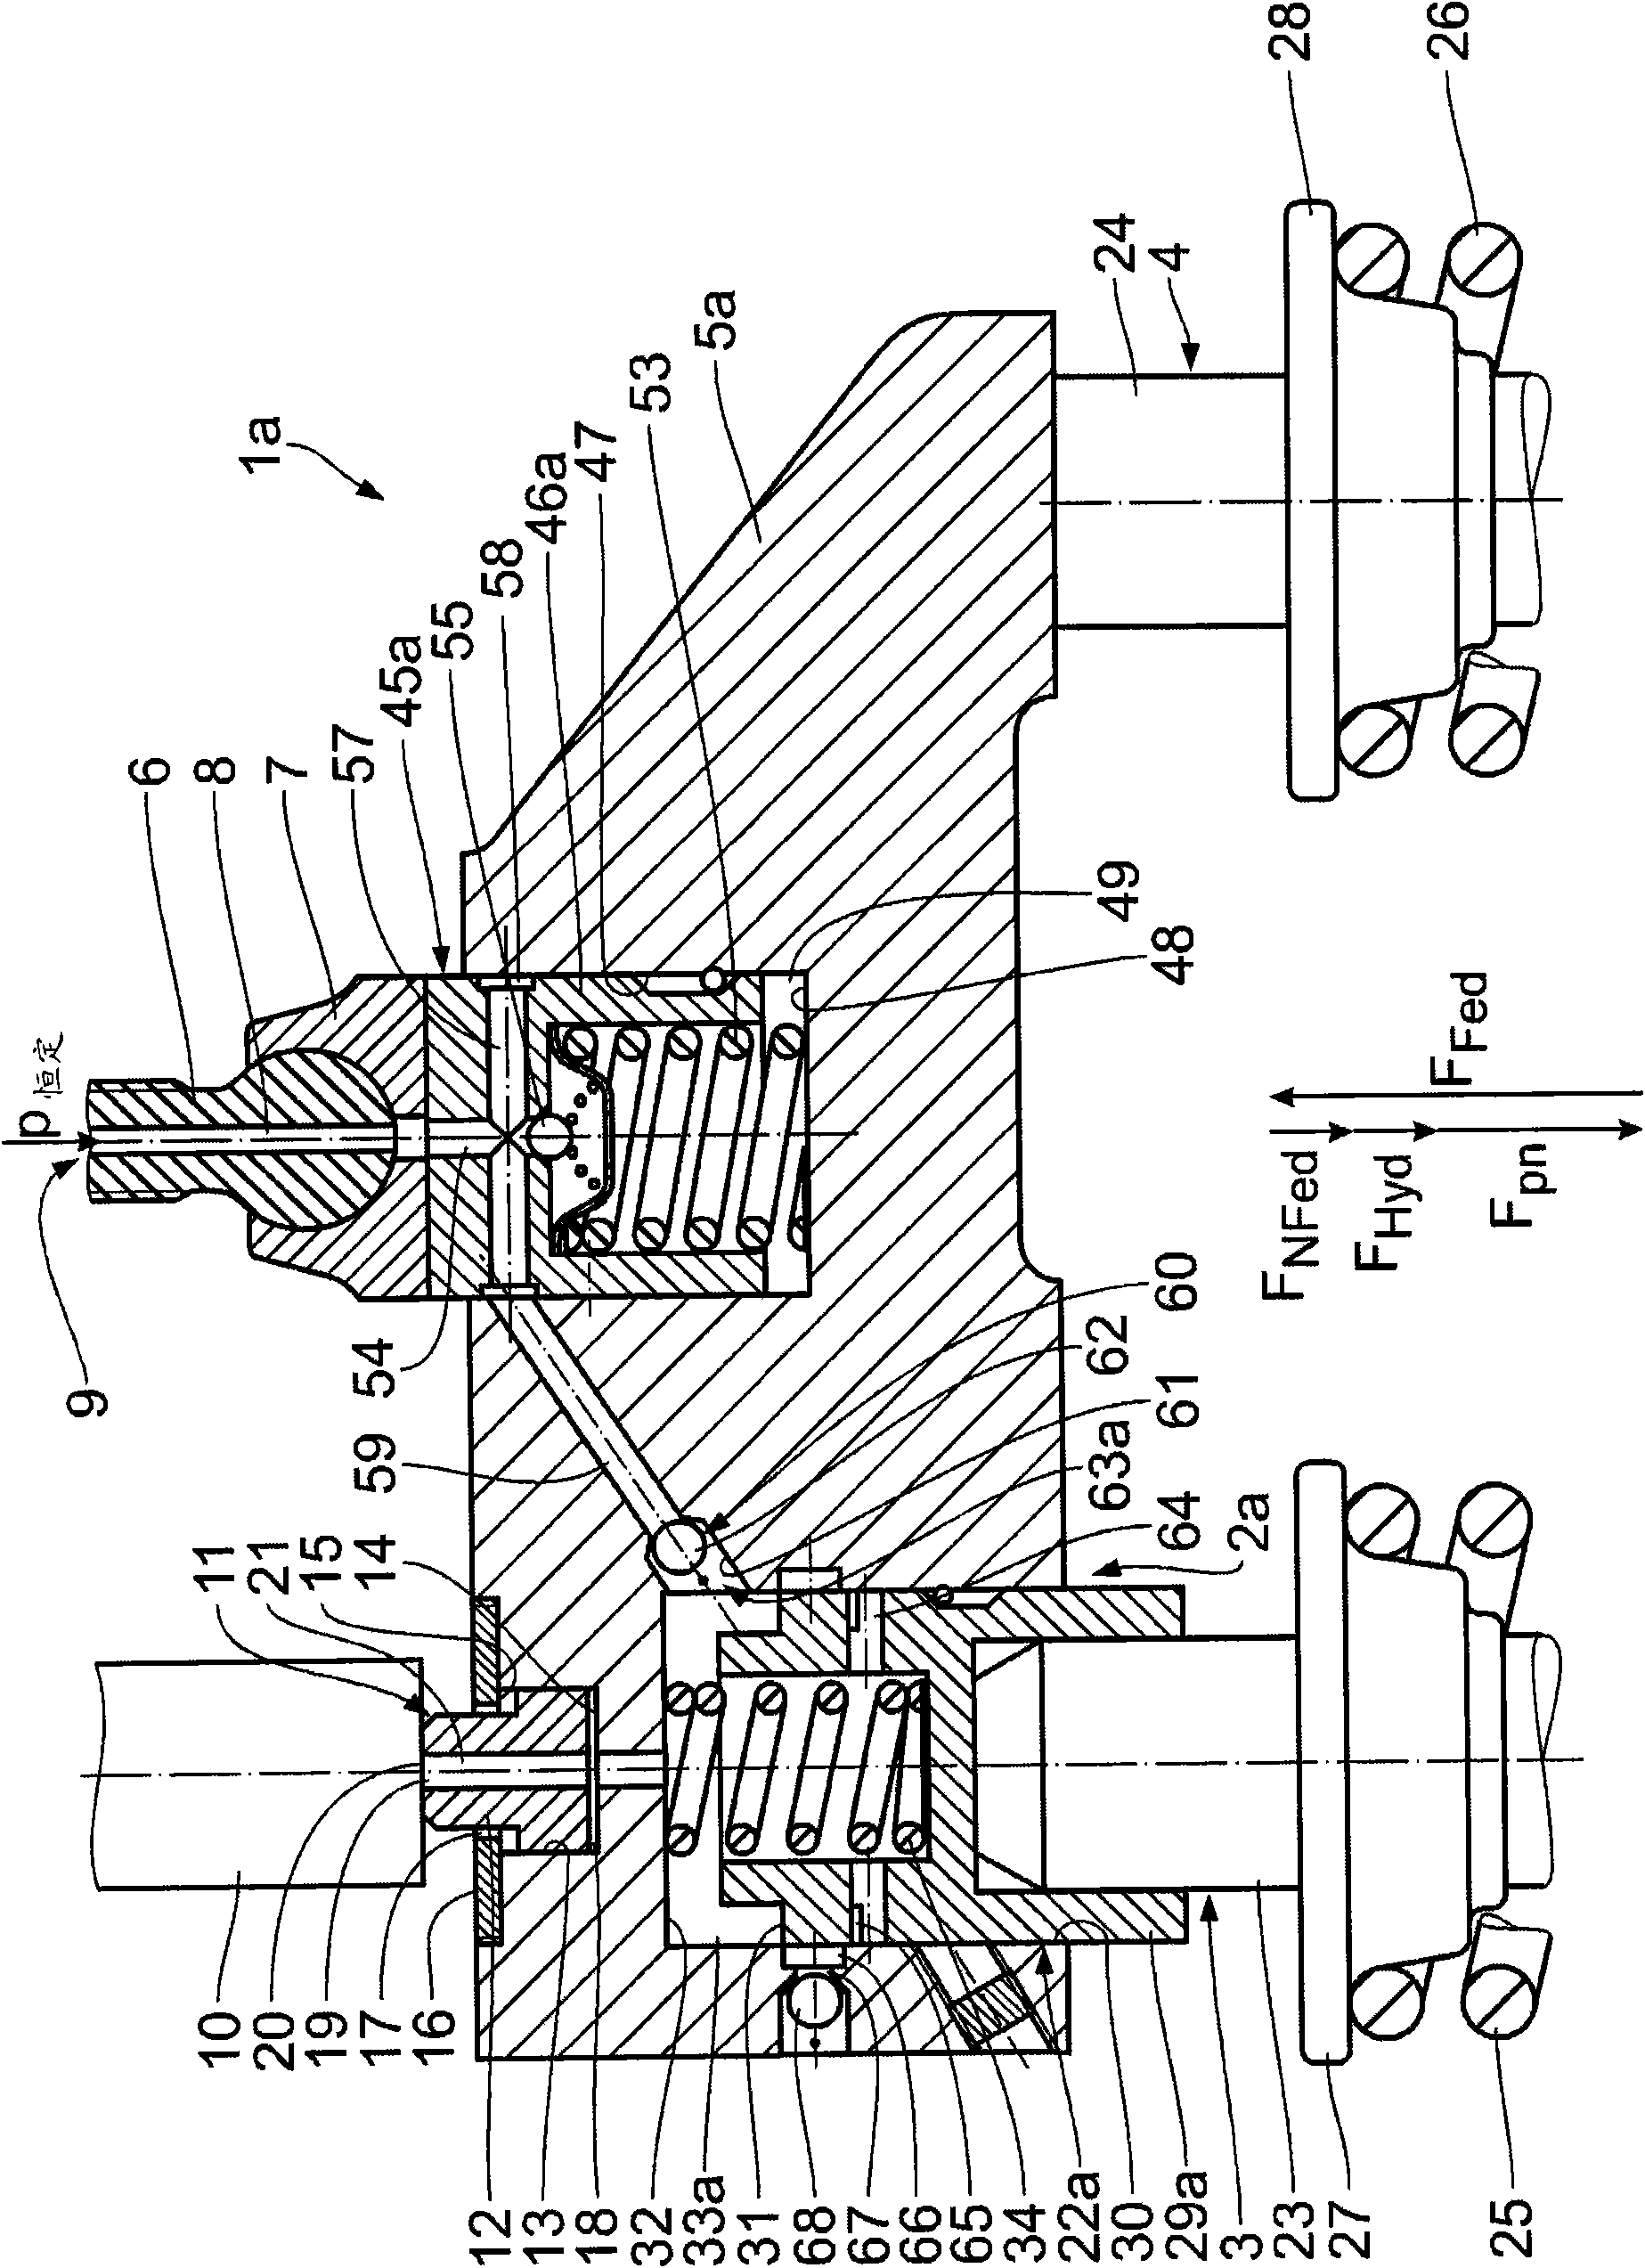 Combustion engine with a motor brake device